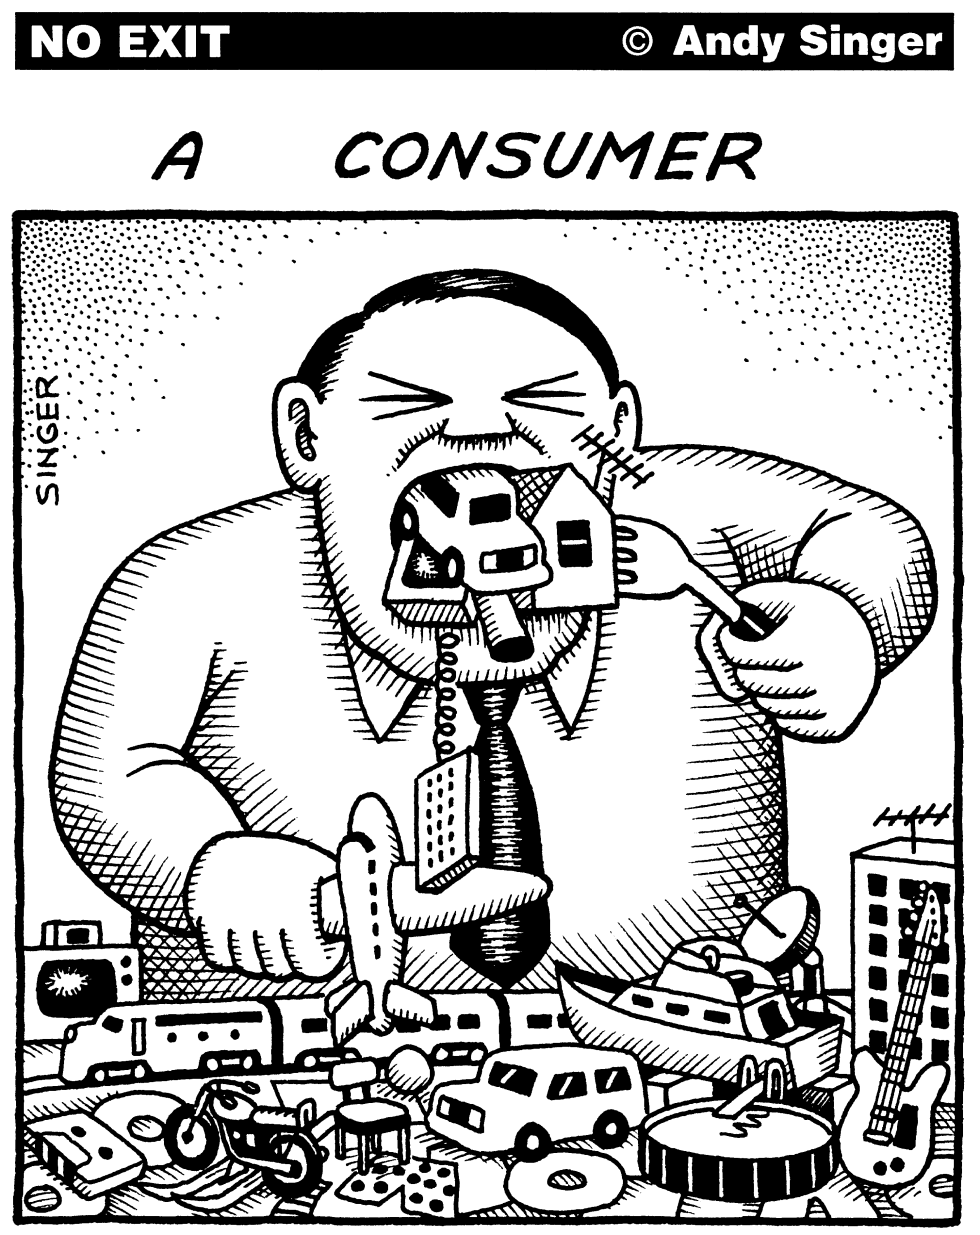 CONSUMER by Andy Singer